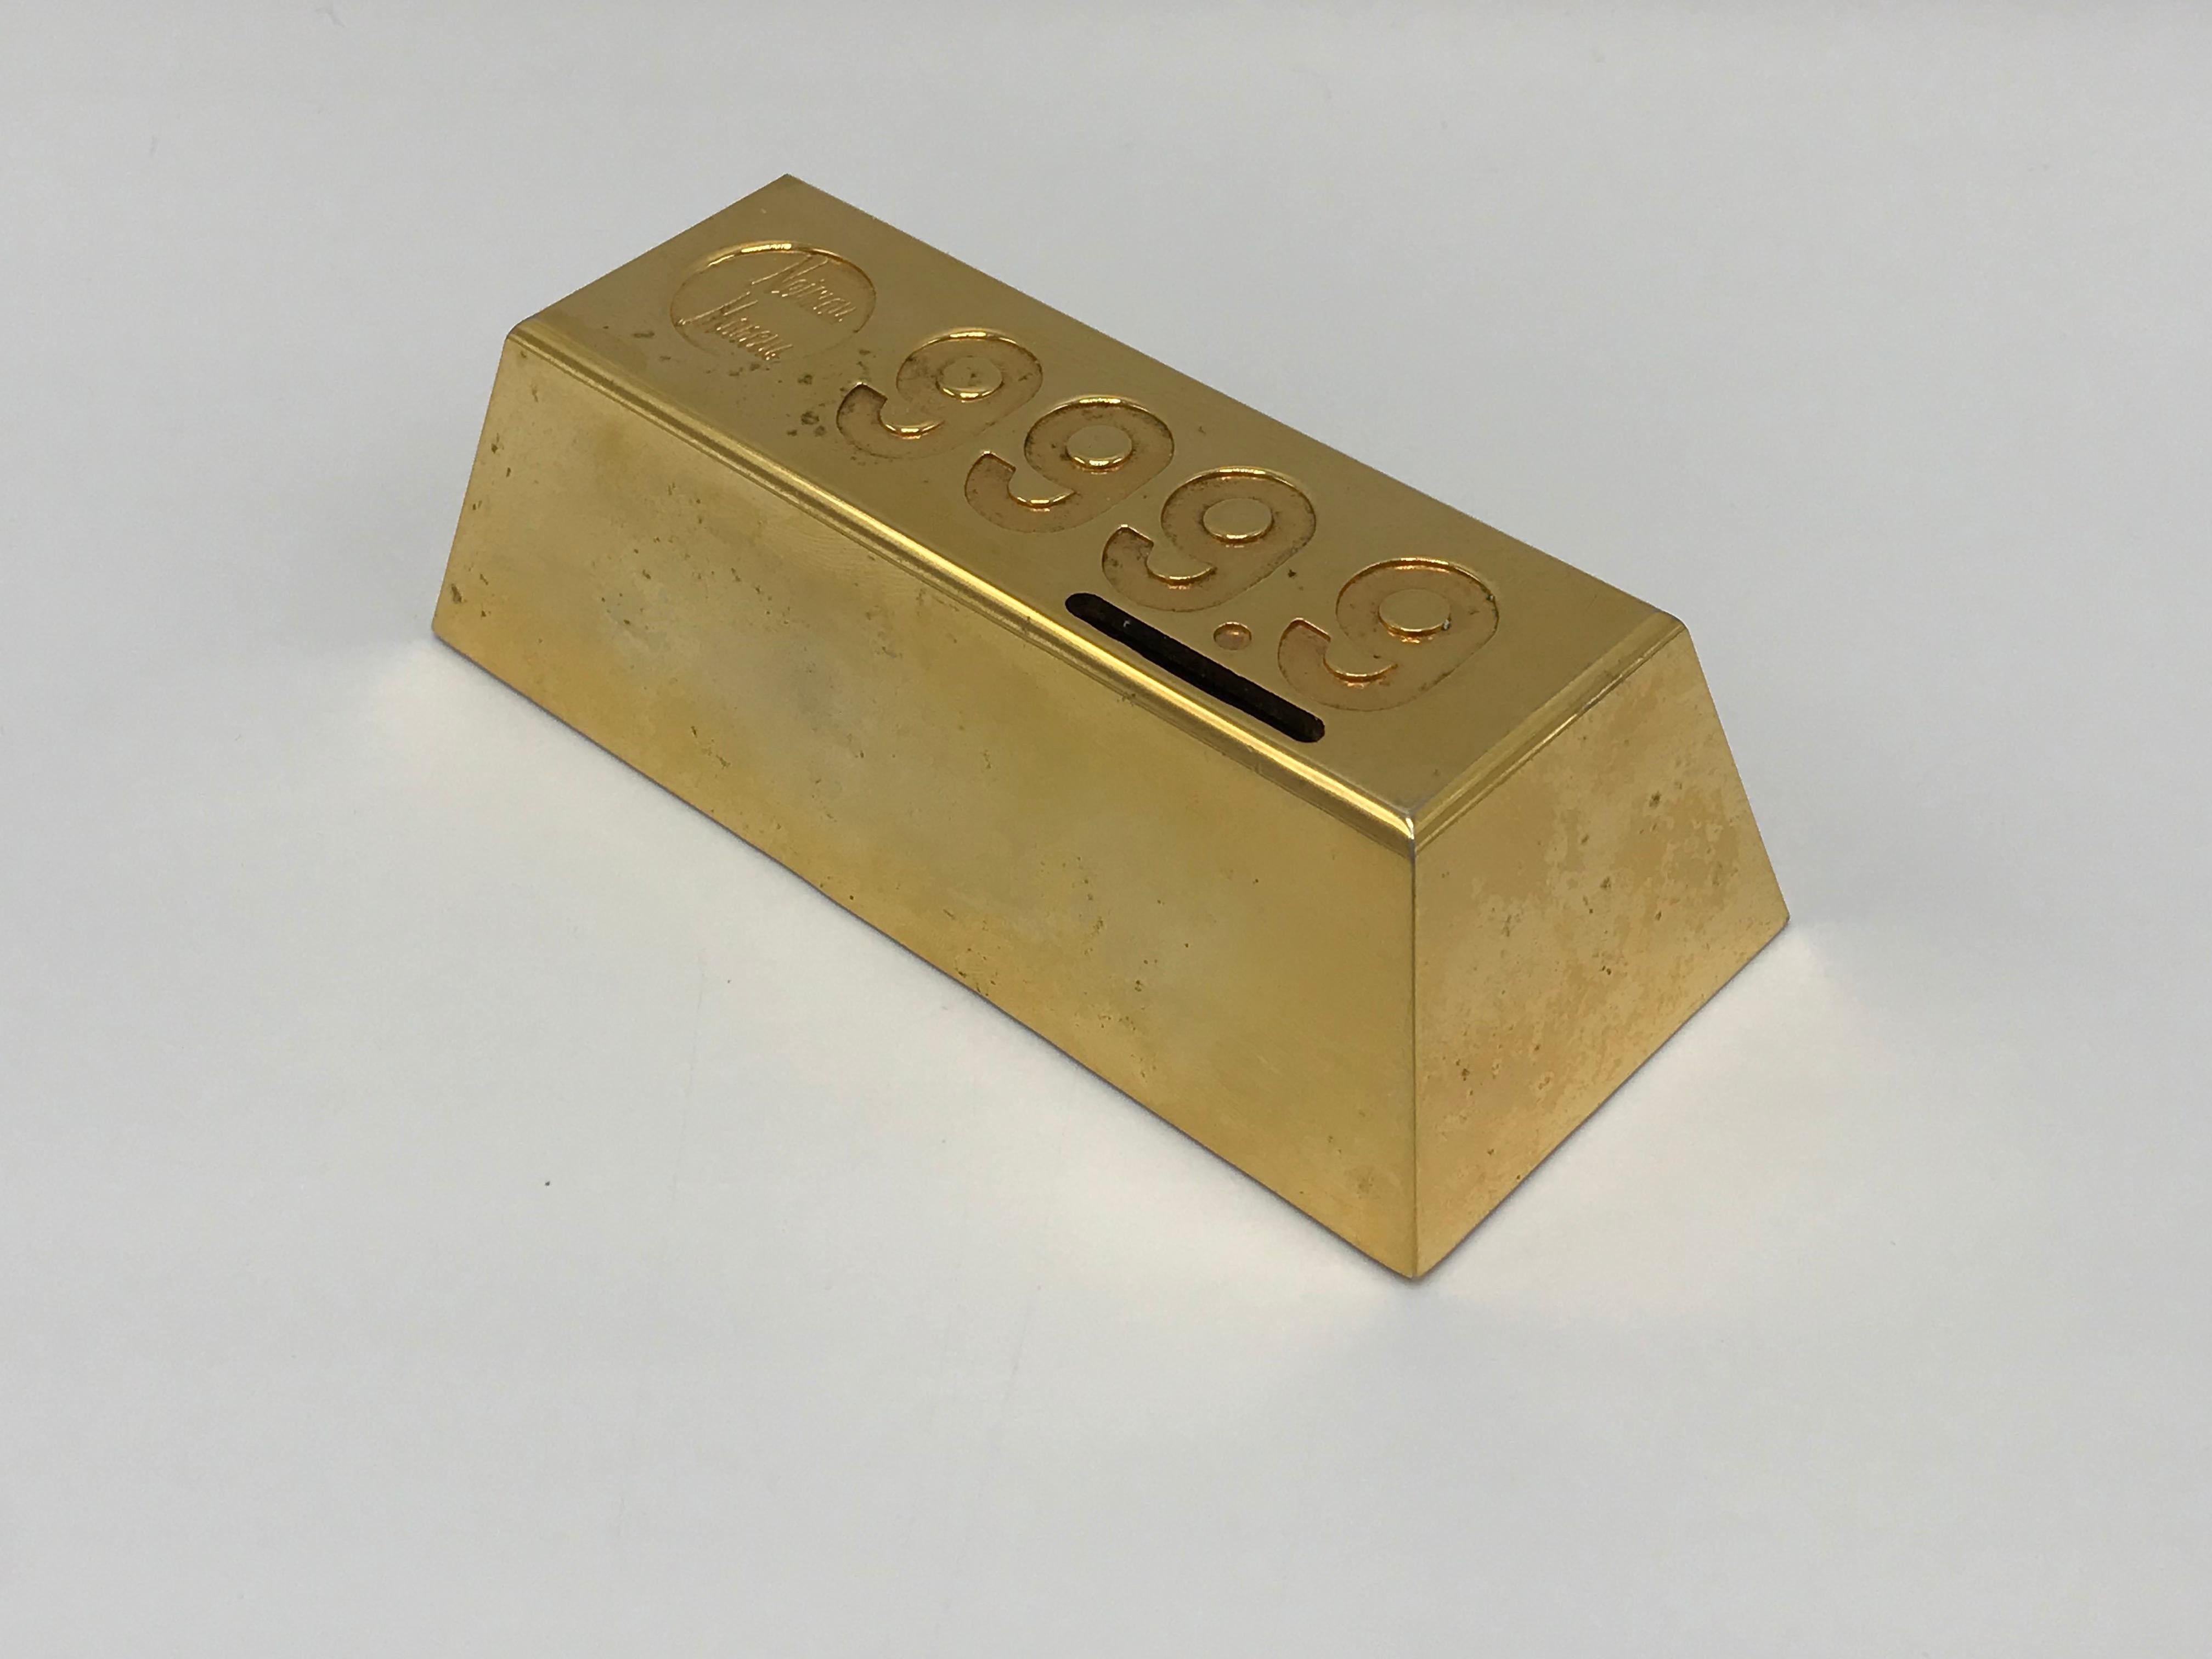 Offered is a highly covetable and collectable, 1980s Neiman Marcus gold-plated brick desktop spare-change bank. Truly a unique and rare collectors item! Marked 'Neiman Marcus' on top. Screw-off insert on underside to remove change. Heavy.